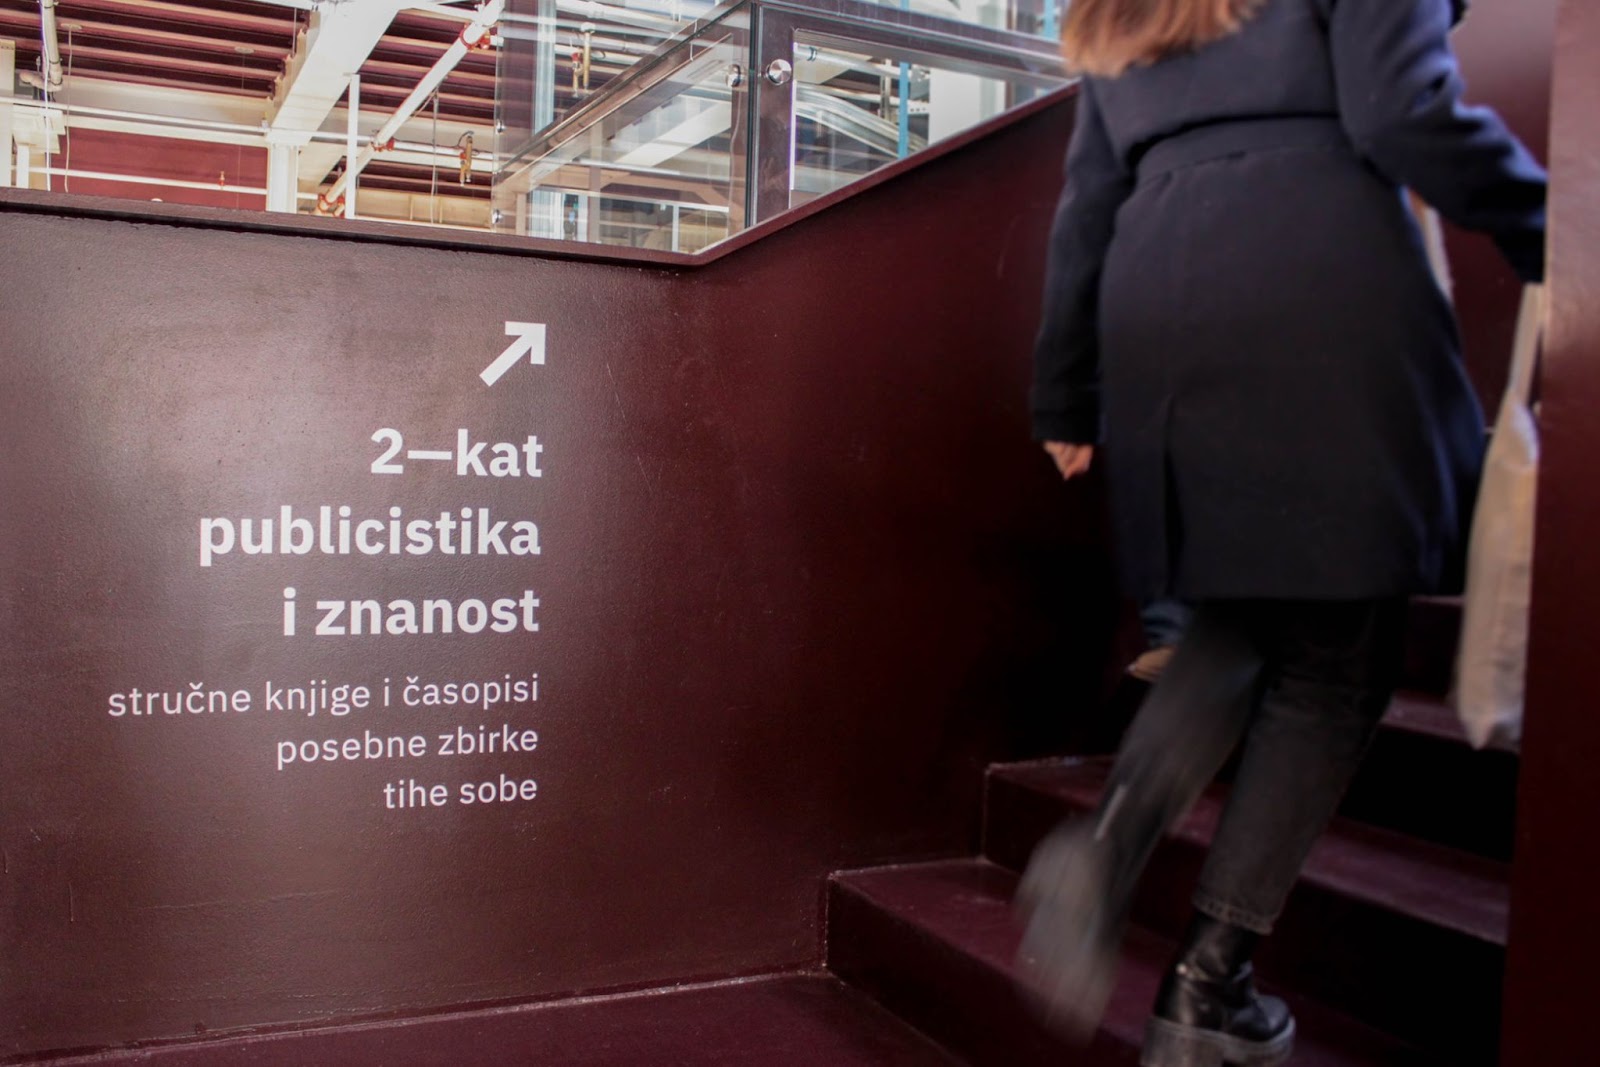 Artifact from the Branding & Visual Identity Redefined at Rijeka Library article on Abduzeedo